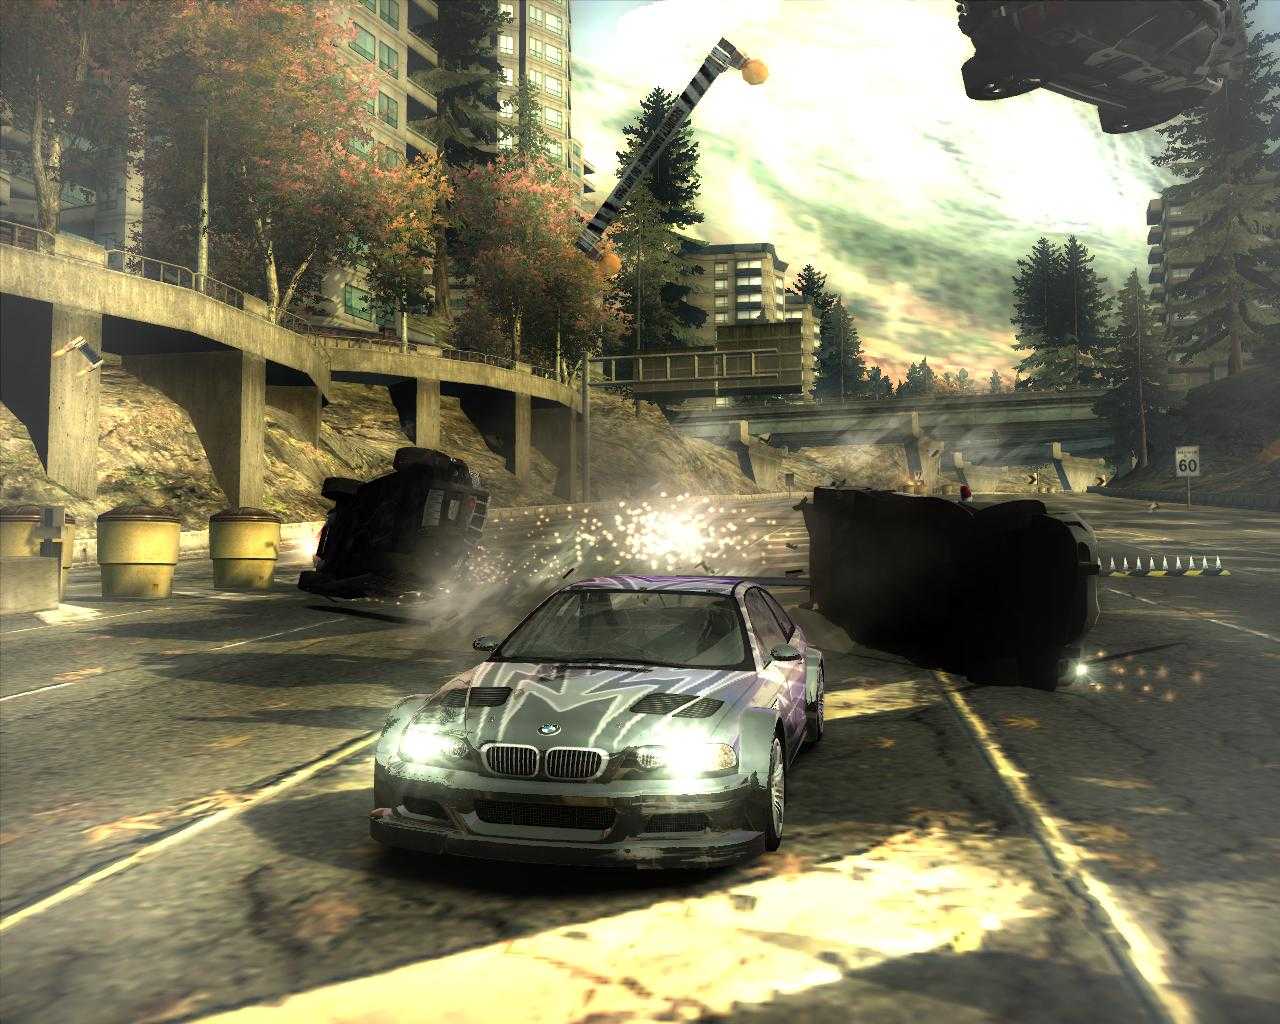 Gofuture games ru. Игра NFS most wanted 2005. Нфс мост вантед 2005. Гонки NFS most wanted 2005. NFS мост вантед 2005.